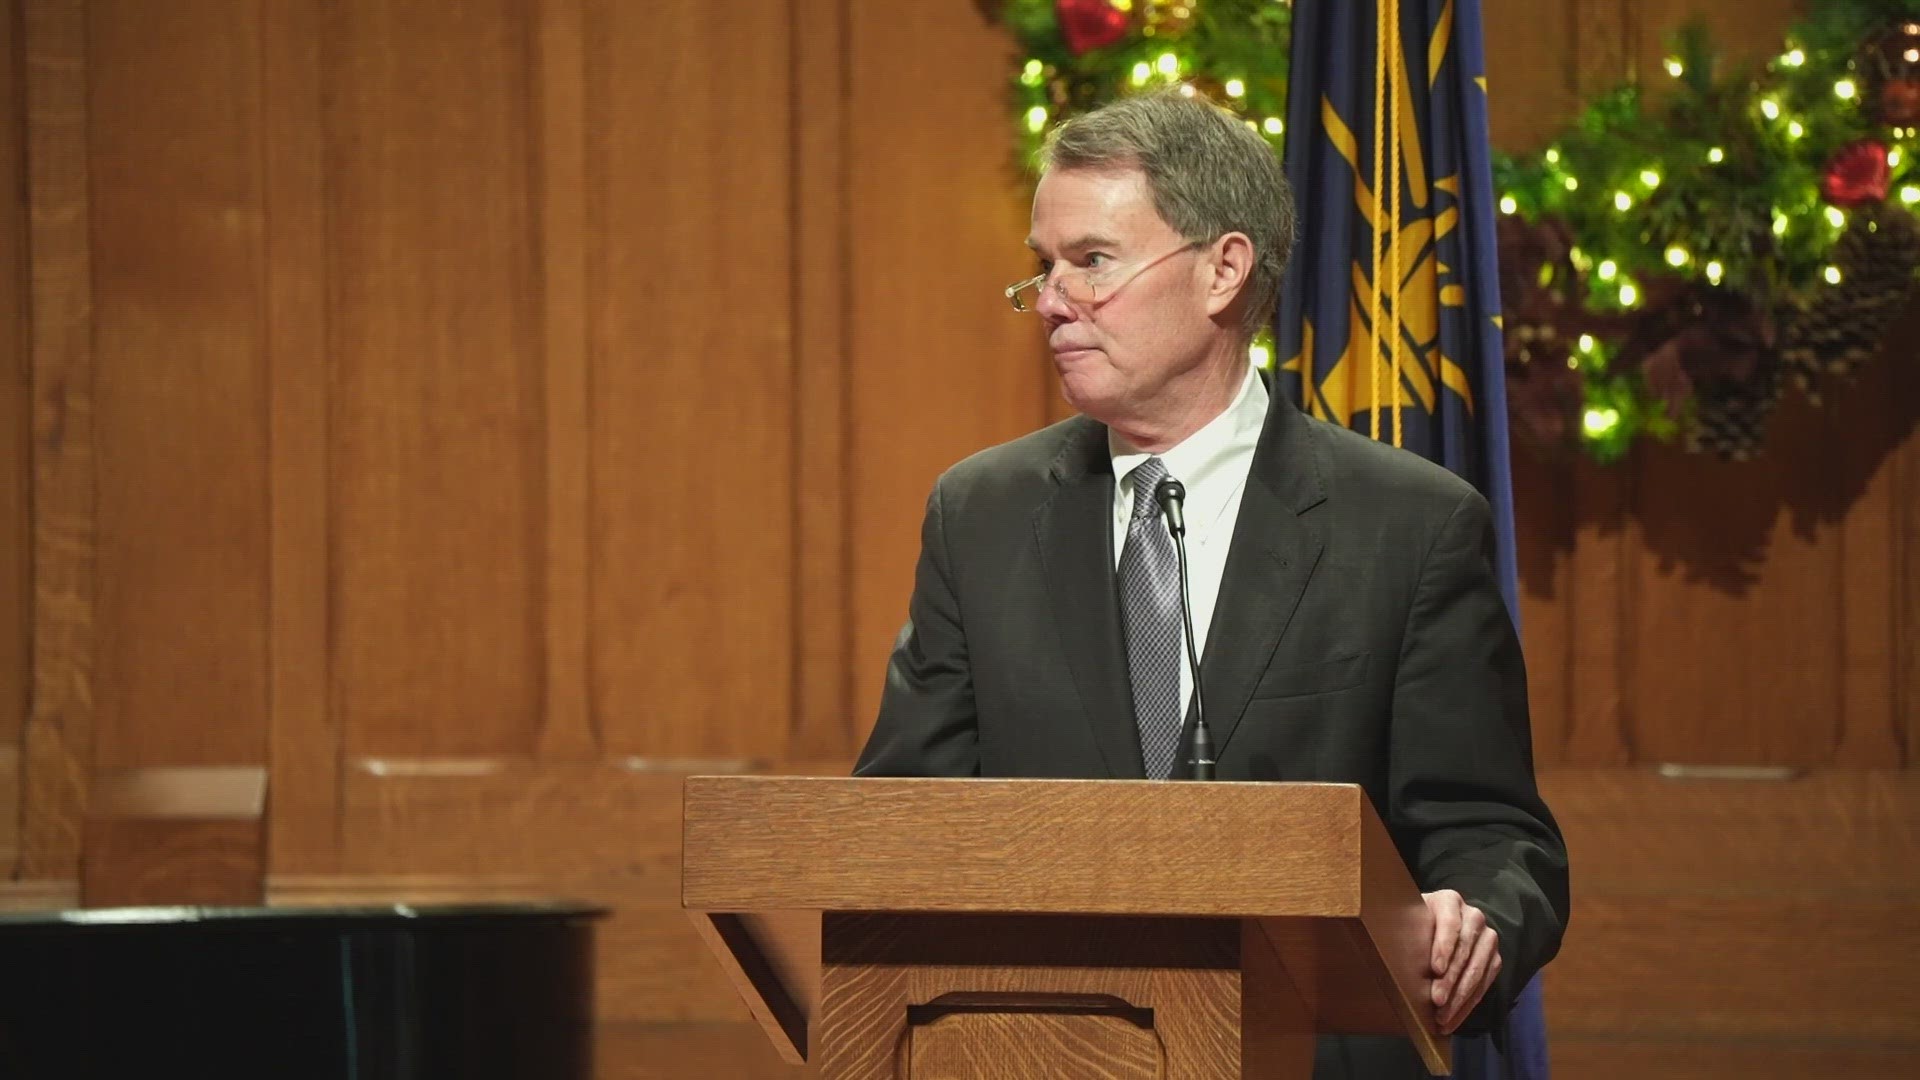 Indianapolis Mayor Joe Hogsett was sworn in Monday for his third term in office.